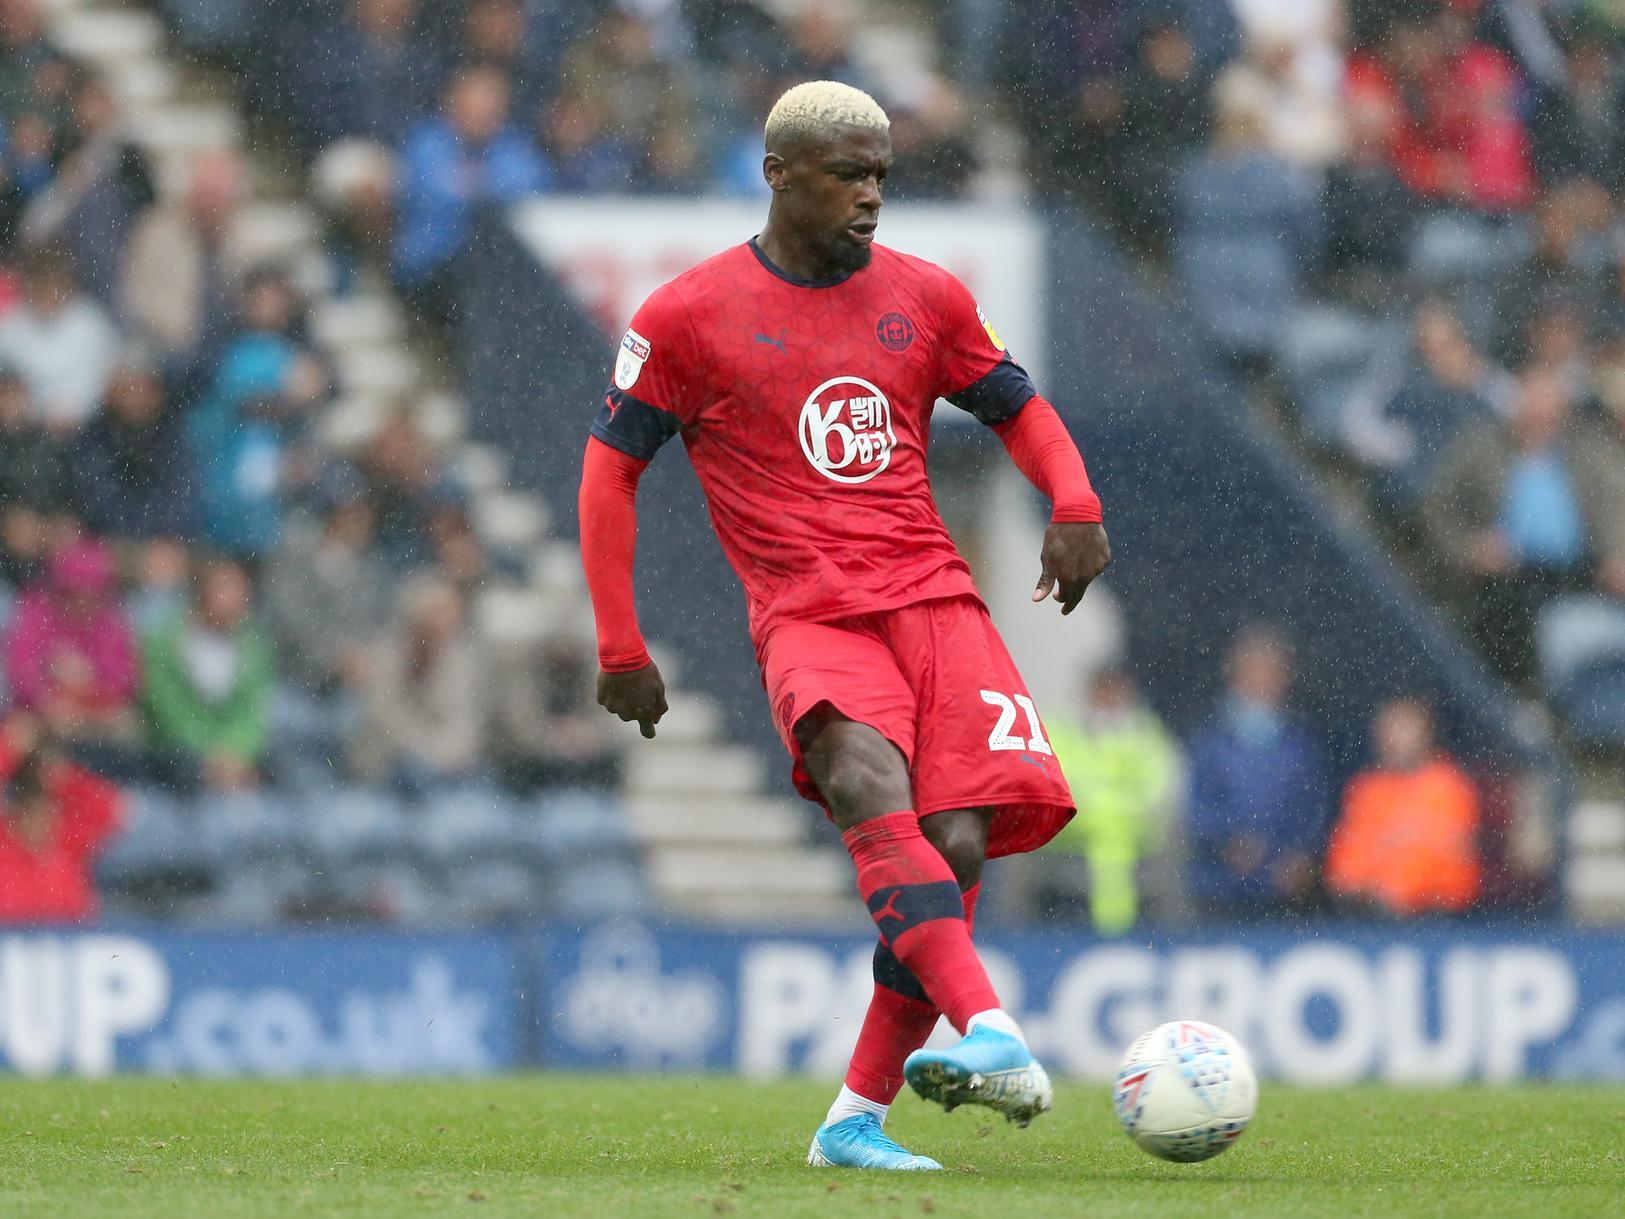 Norwich City want West Brom defender Cedric Kipre to play a part in their attempts to secure an immediate return to the Premier League (Birmingham Mail)